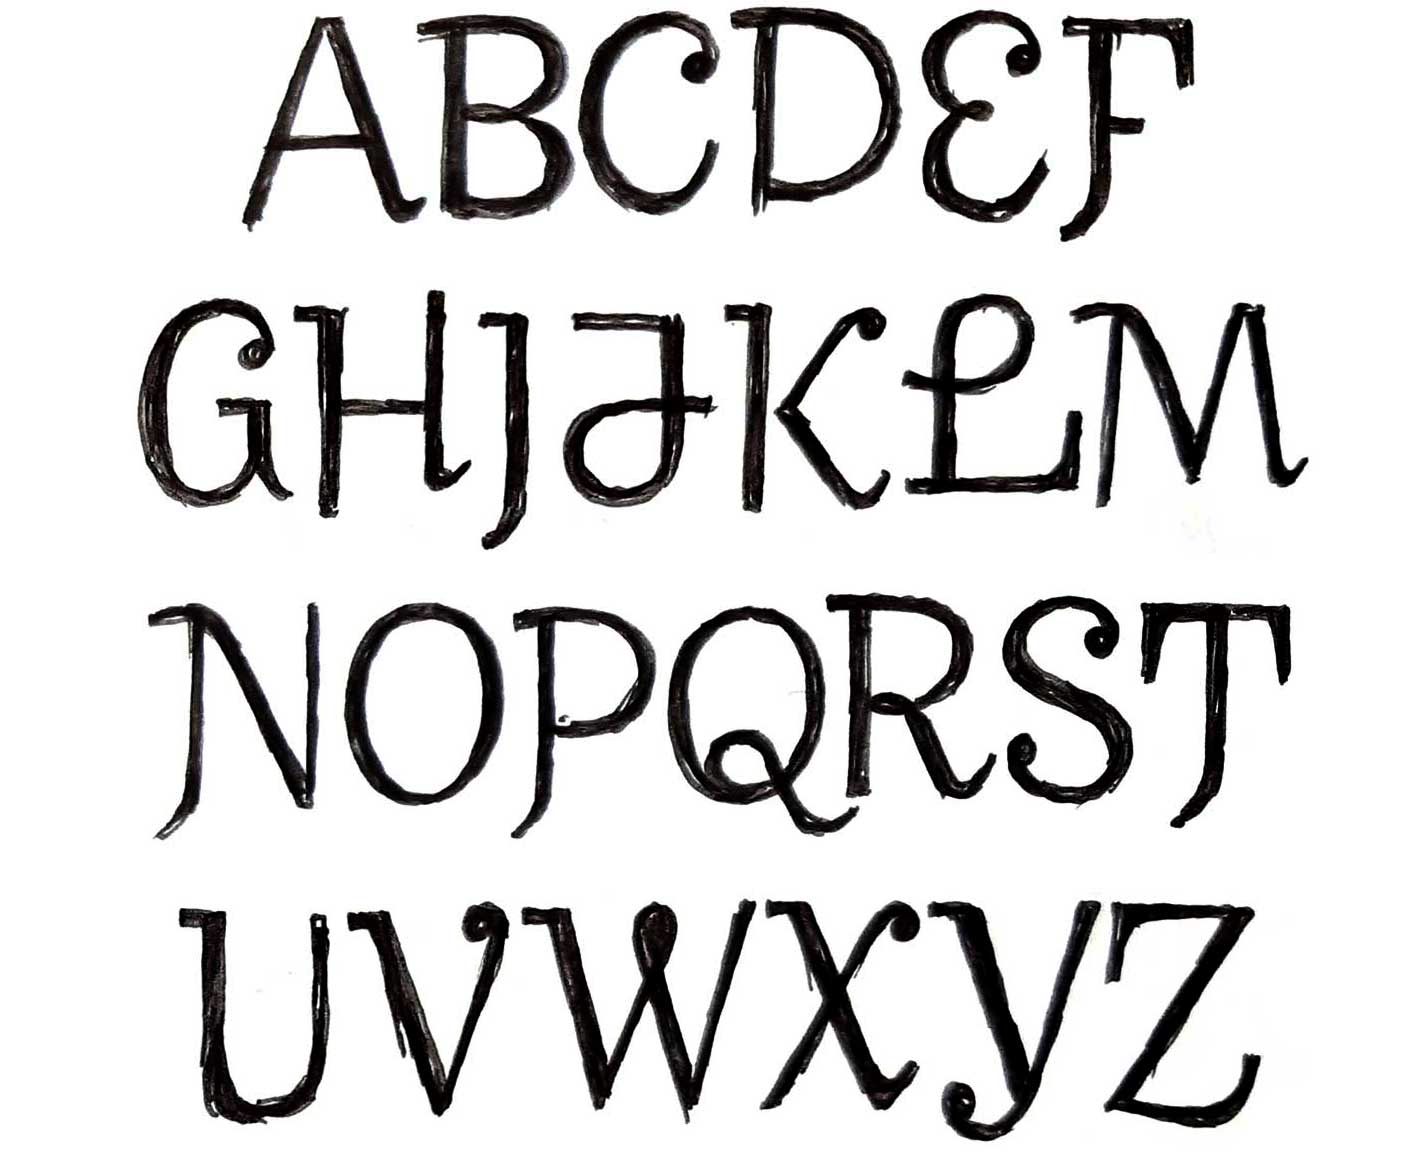 Alphabet of manual drawn capital letters